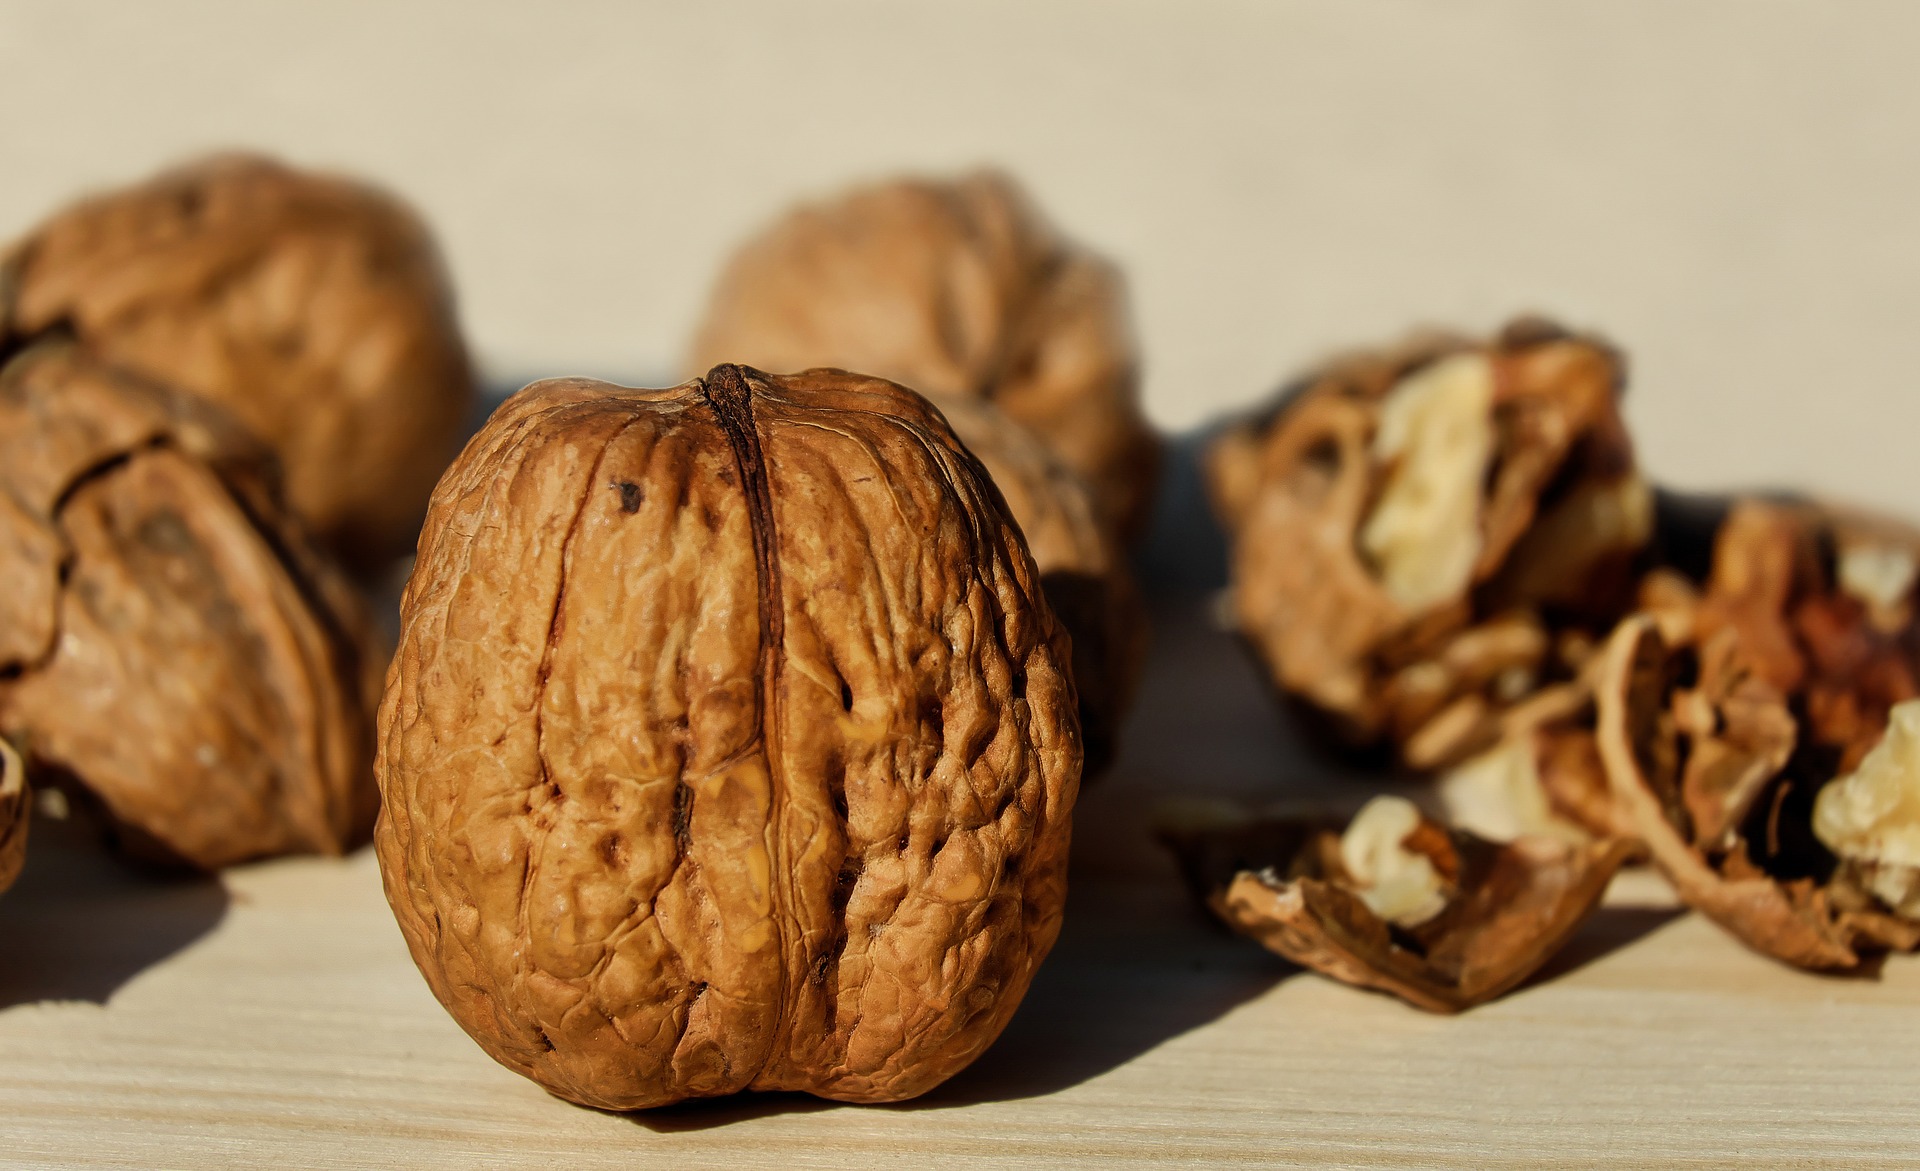 Walnuts: Our Gut’s Newest Friend